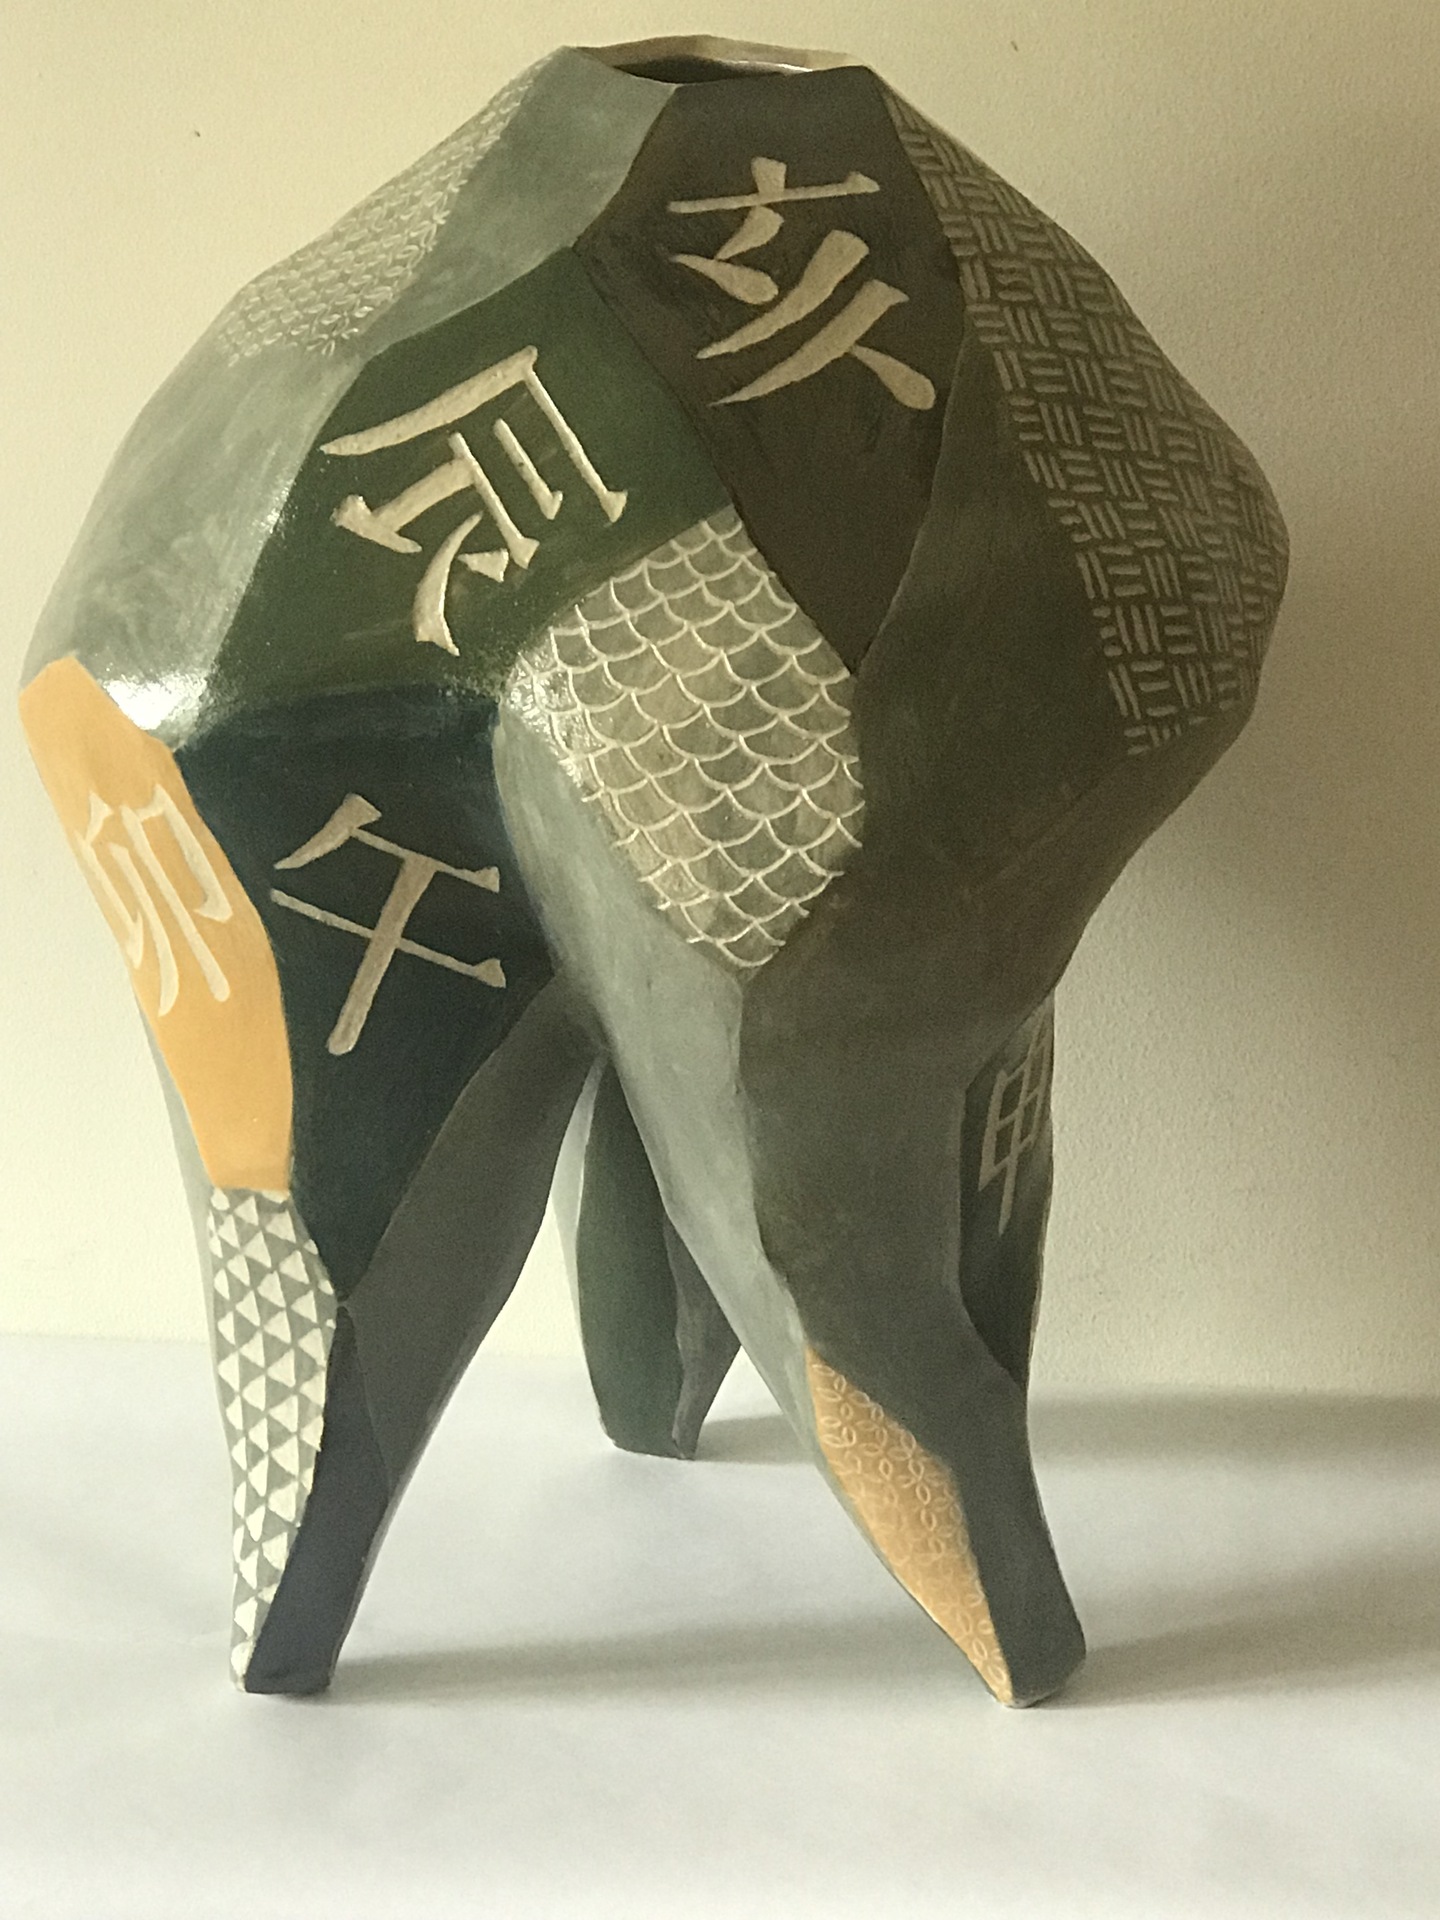 Mariko Bird High Fire Stoneware Abstract Sculpture with Asian Characters 